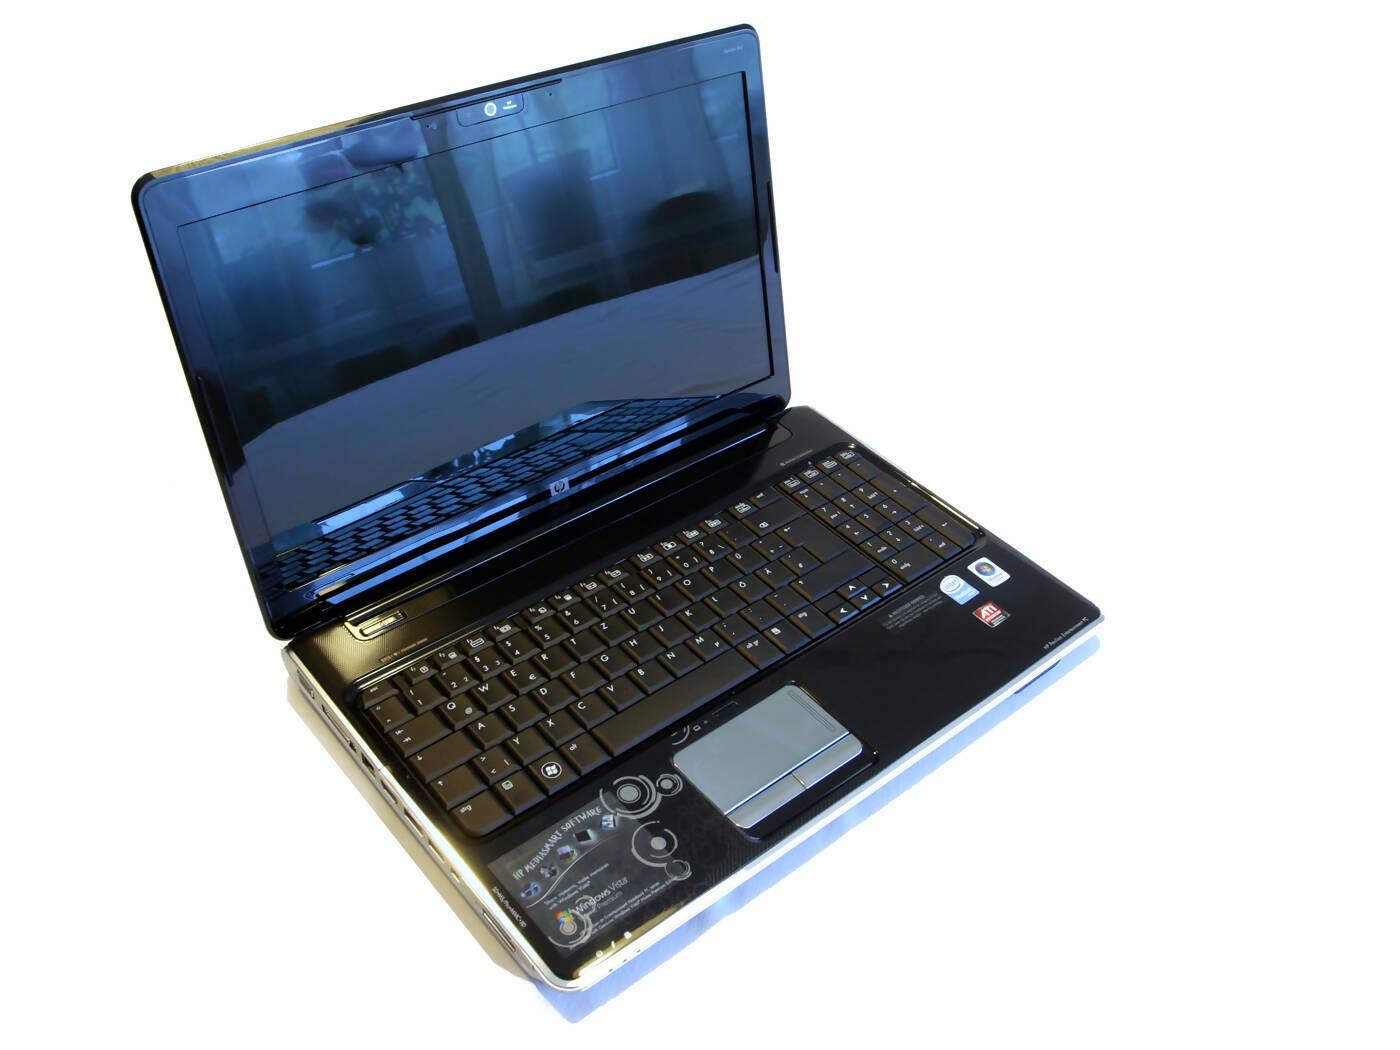 core 2 due glossy mix brand 4Gb ram and 250 GB hard disk - ValueBox